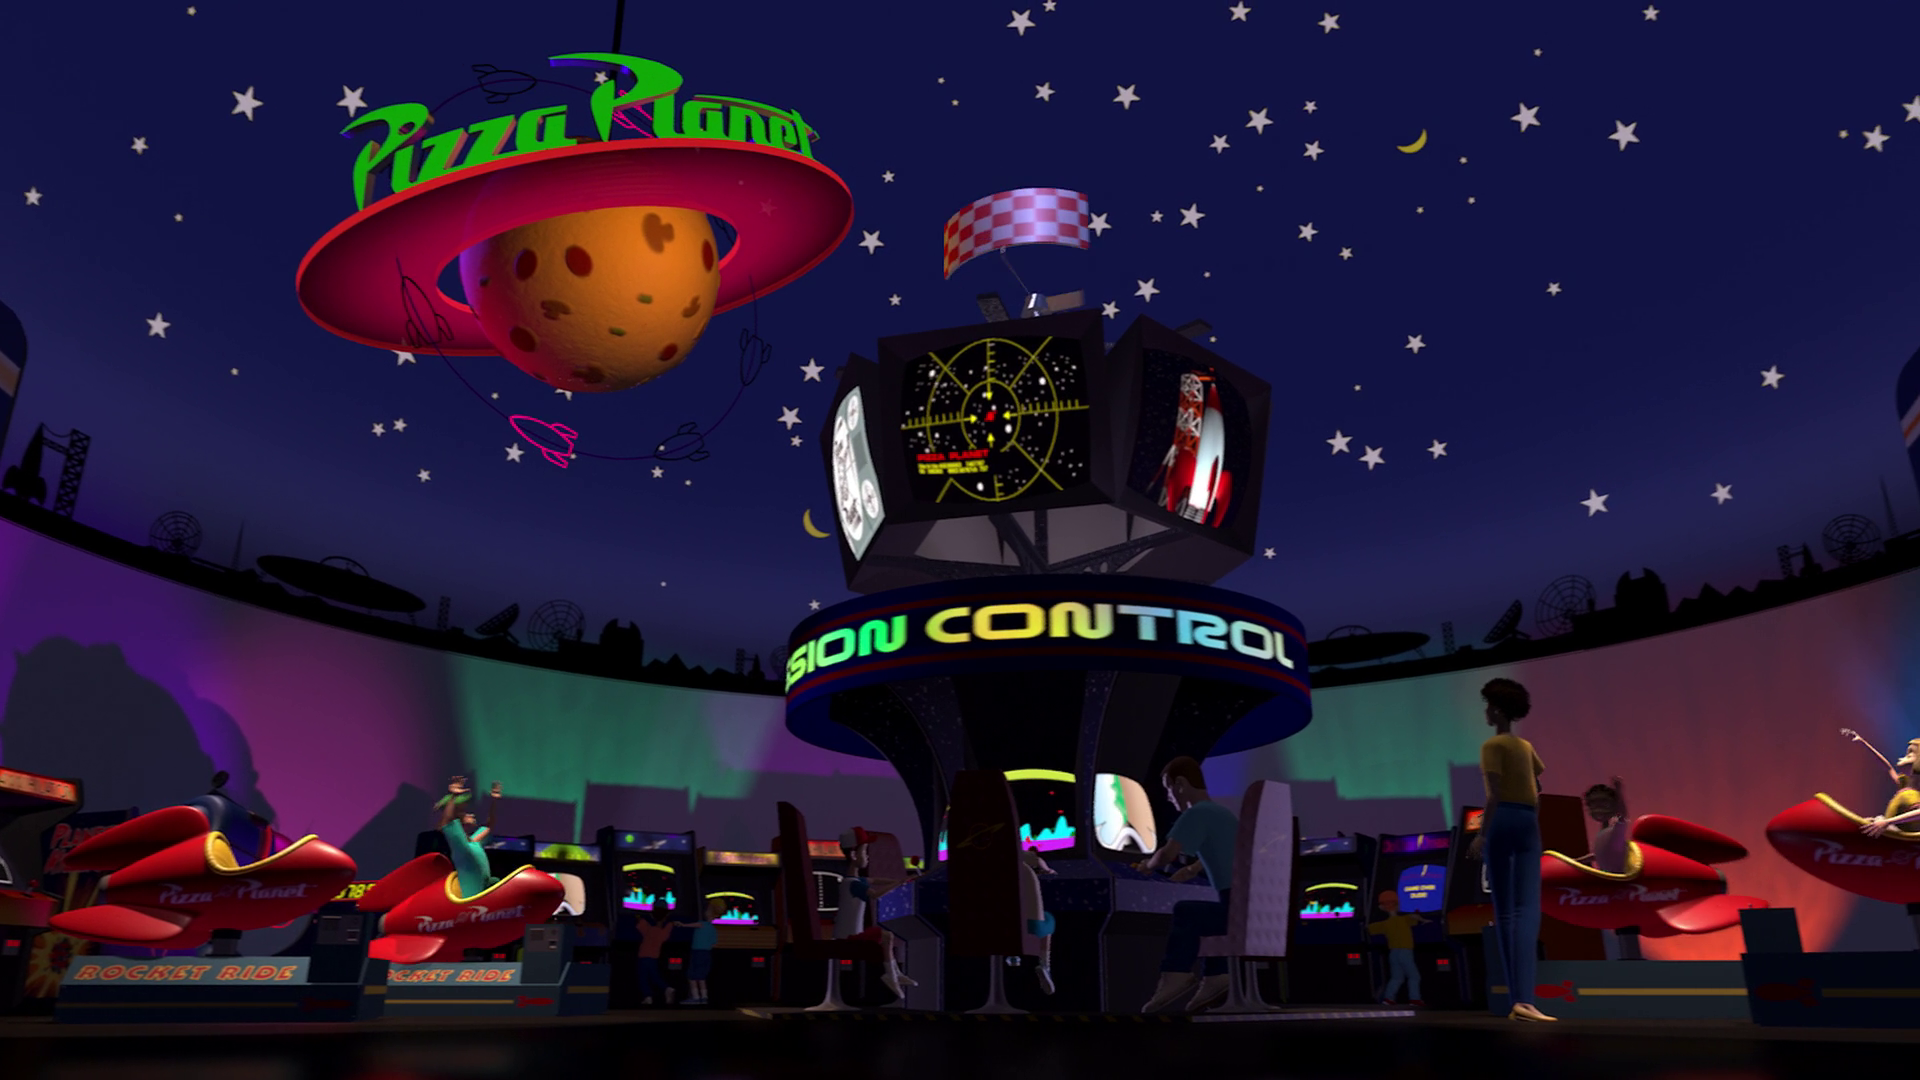 Image - Pizza Planet.png | Pixar Wiki | Fandom powered by Wikia